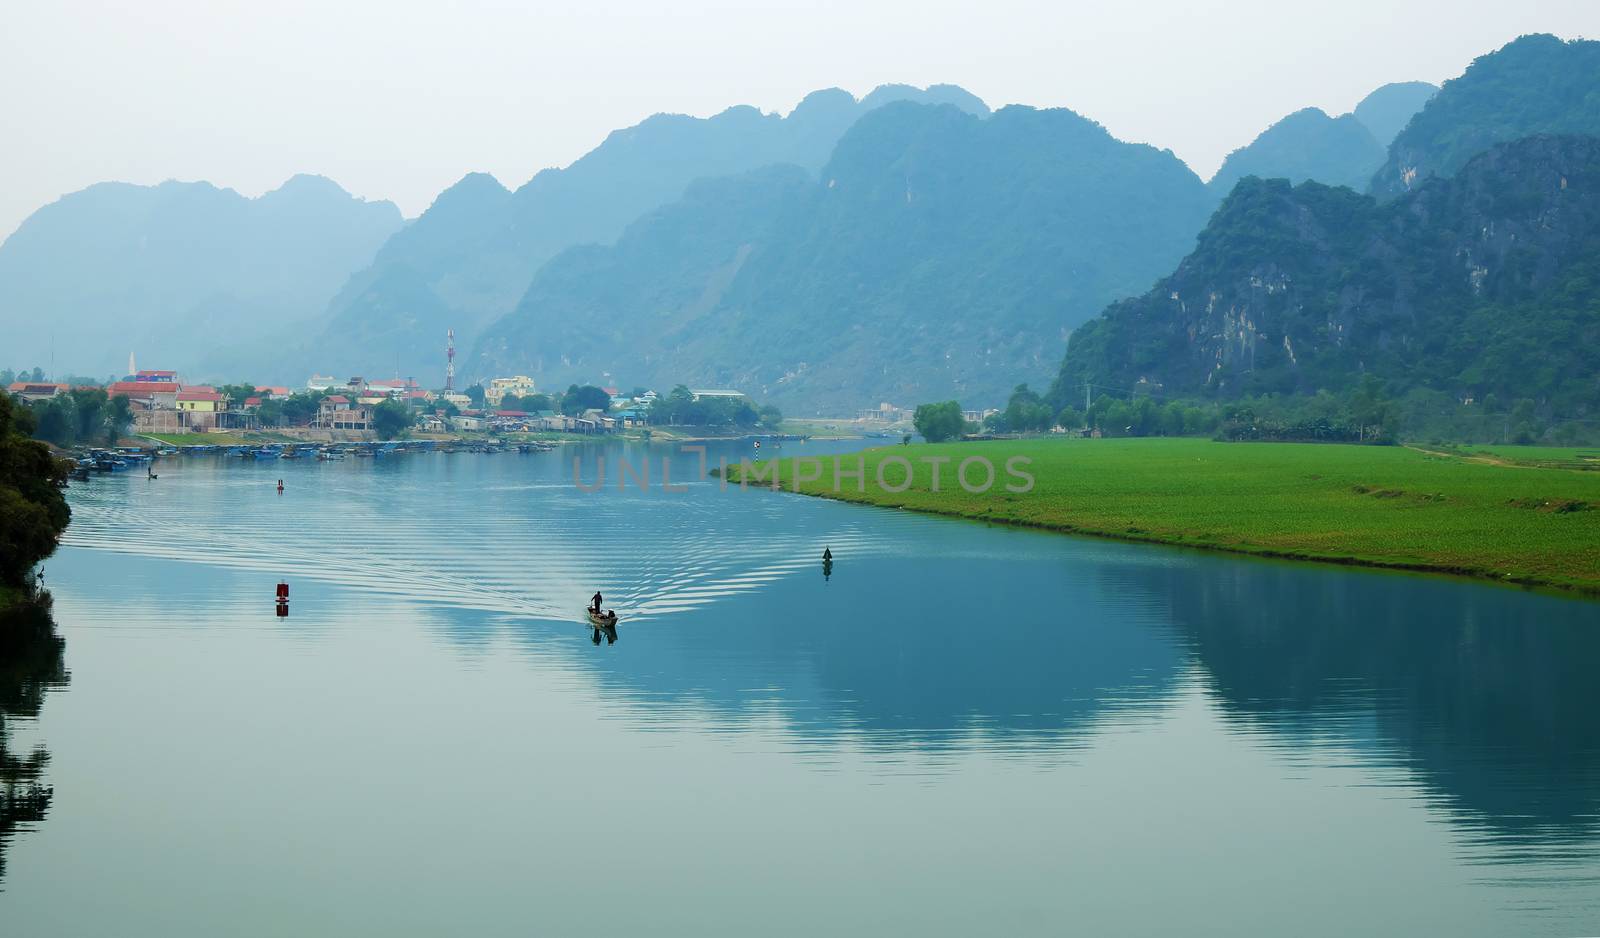 Amazing natural landscape at Quang Binh, Viet Nam by xuanhuongho